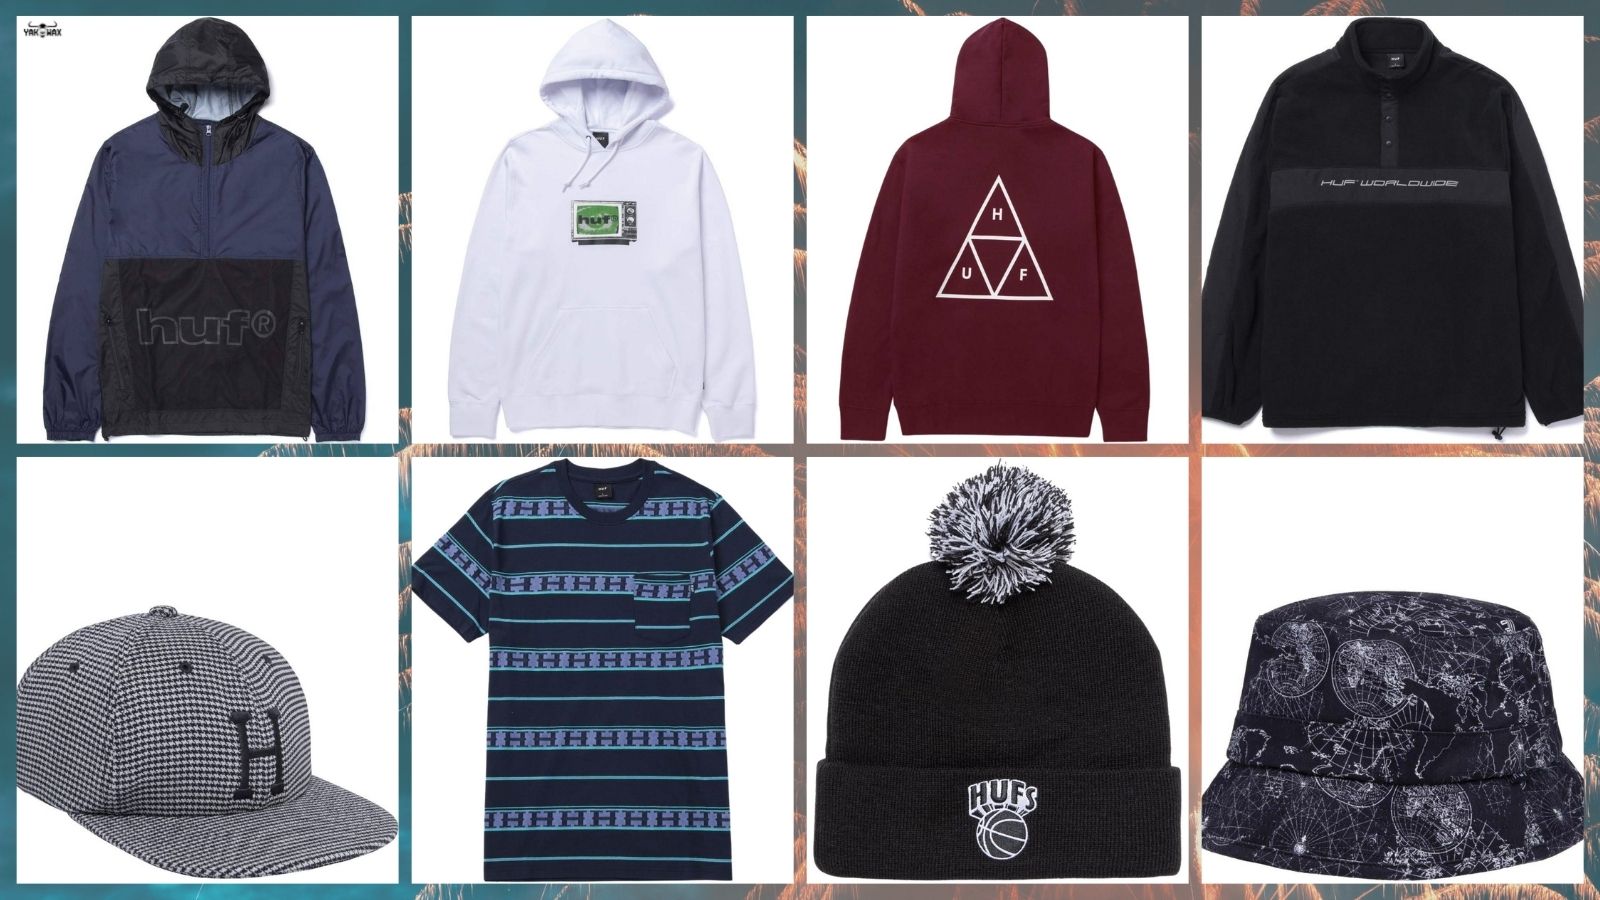 Rad Huf Clothing and Accessories Holiday 2021 Drop Now at Yakwax!